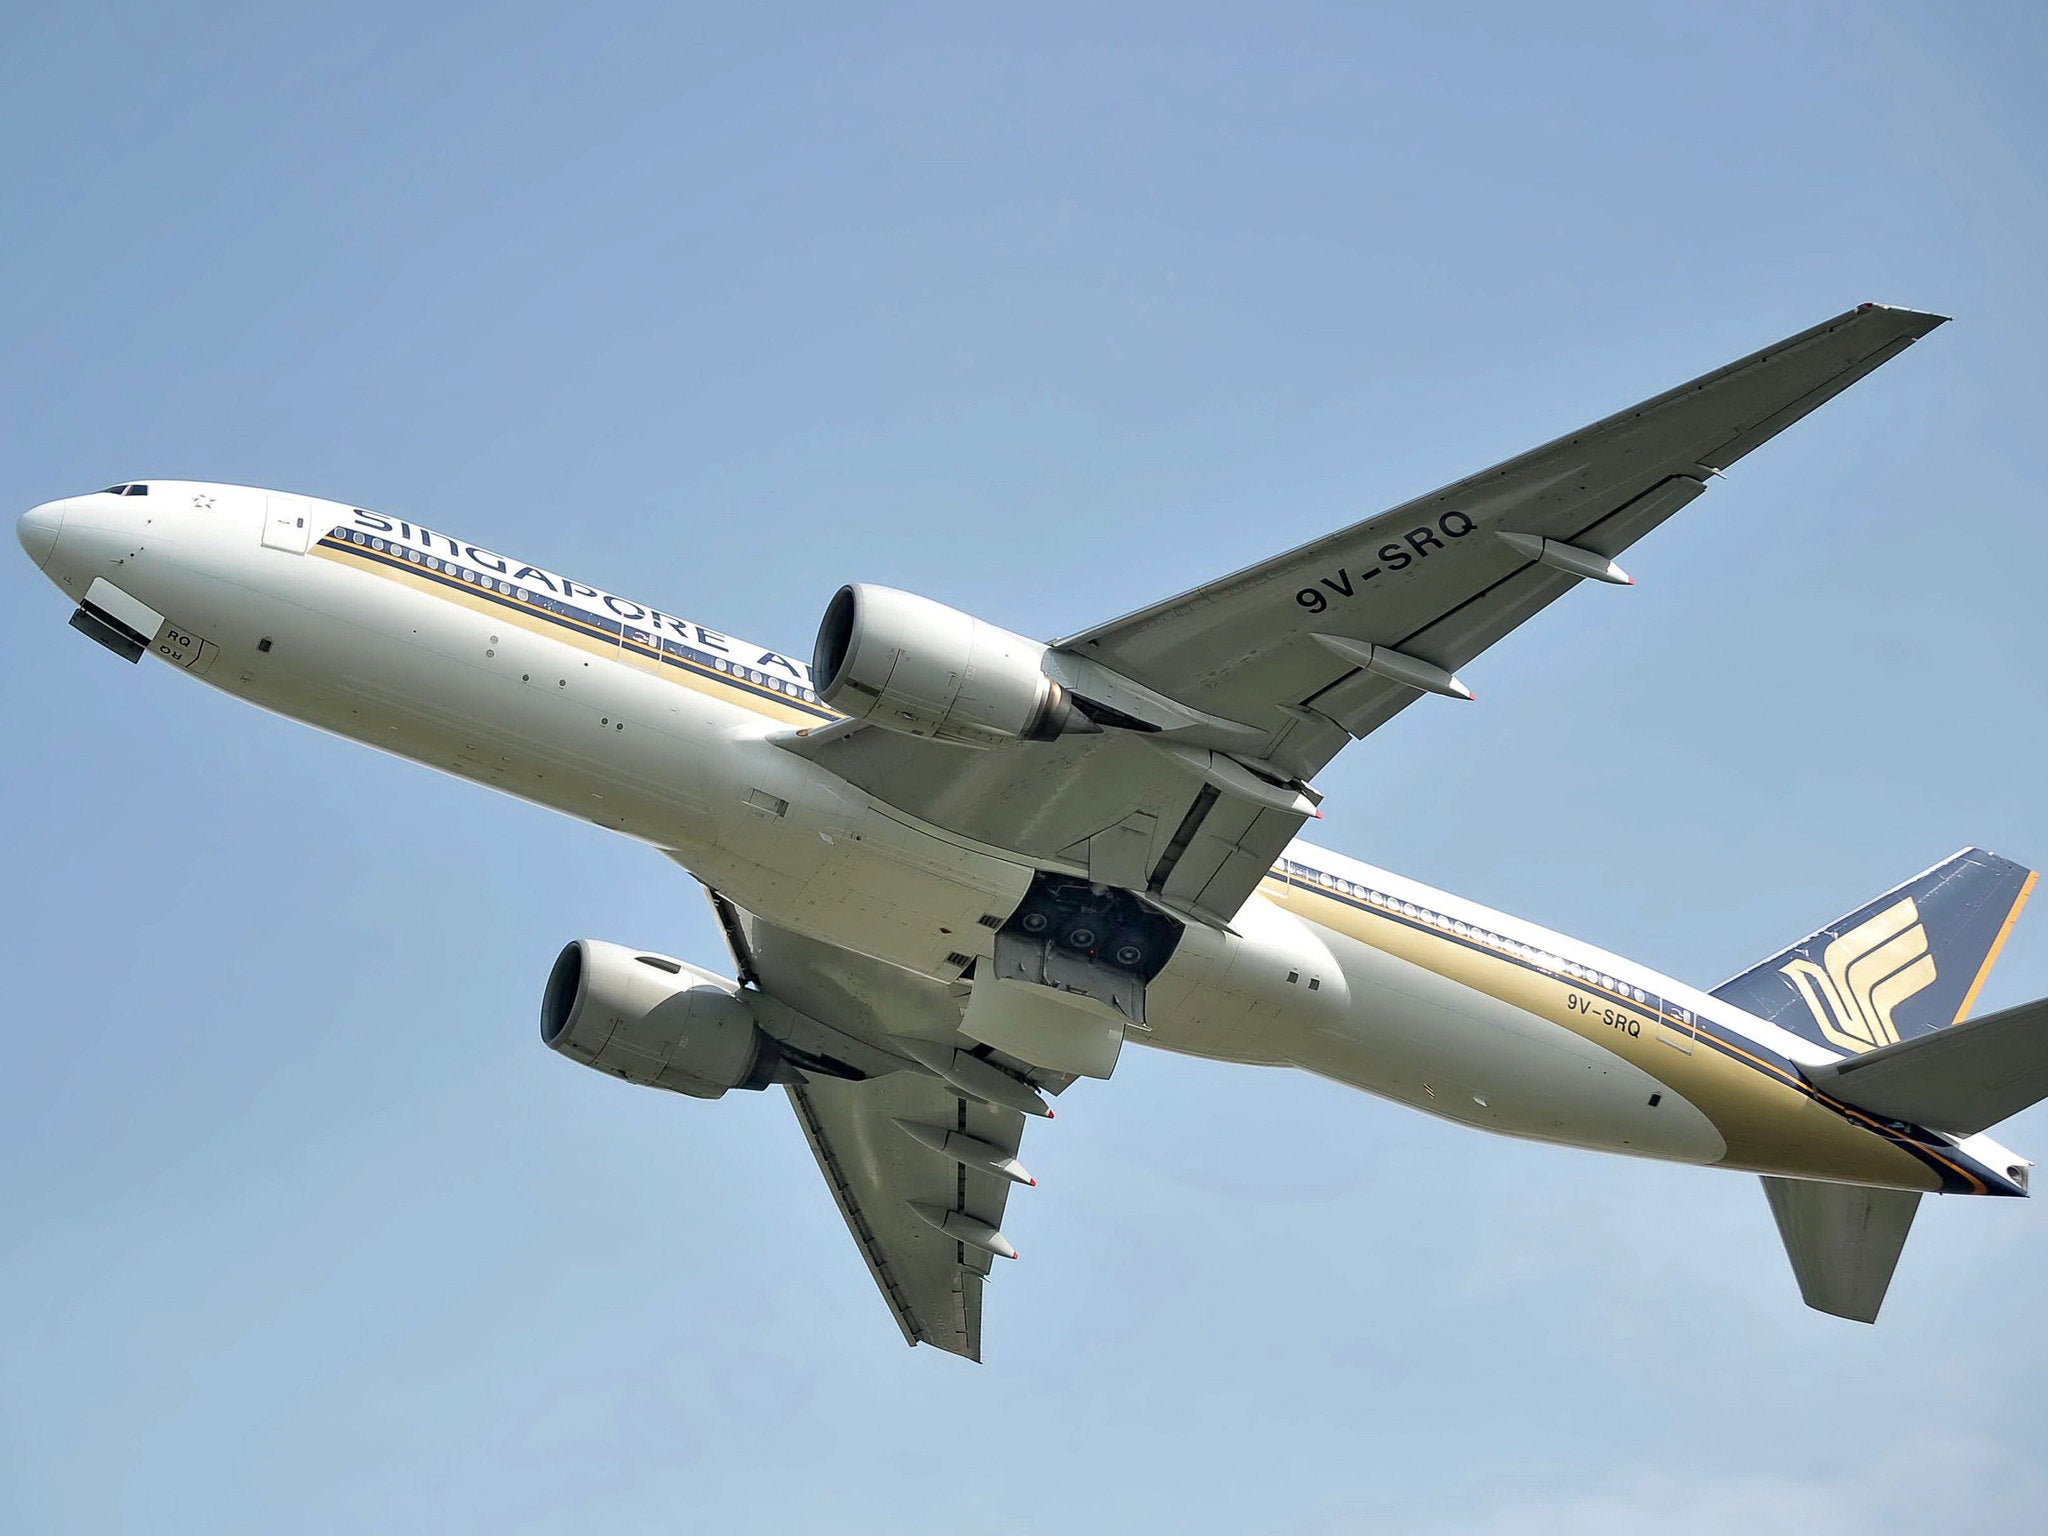 Singapore Airlines has launched an investigation